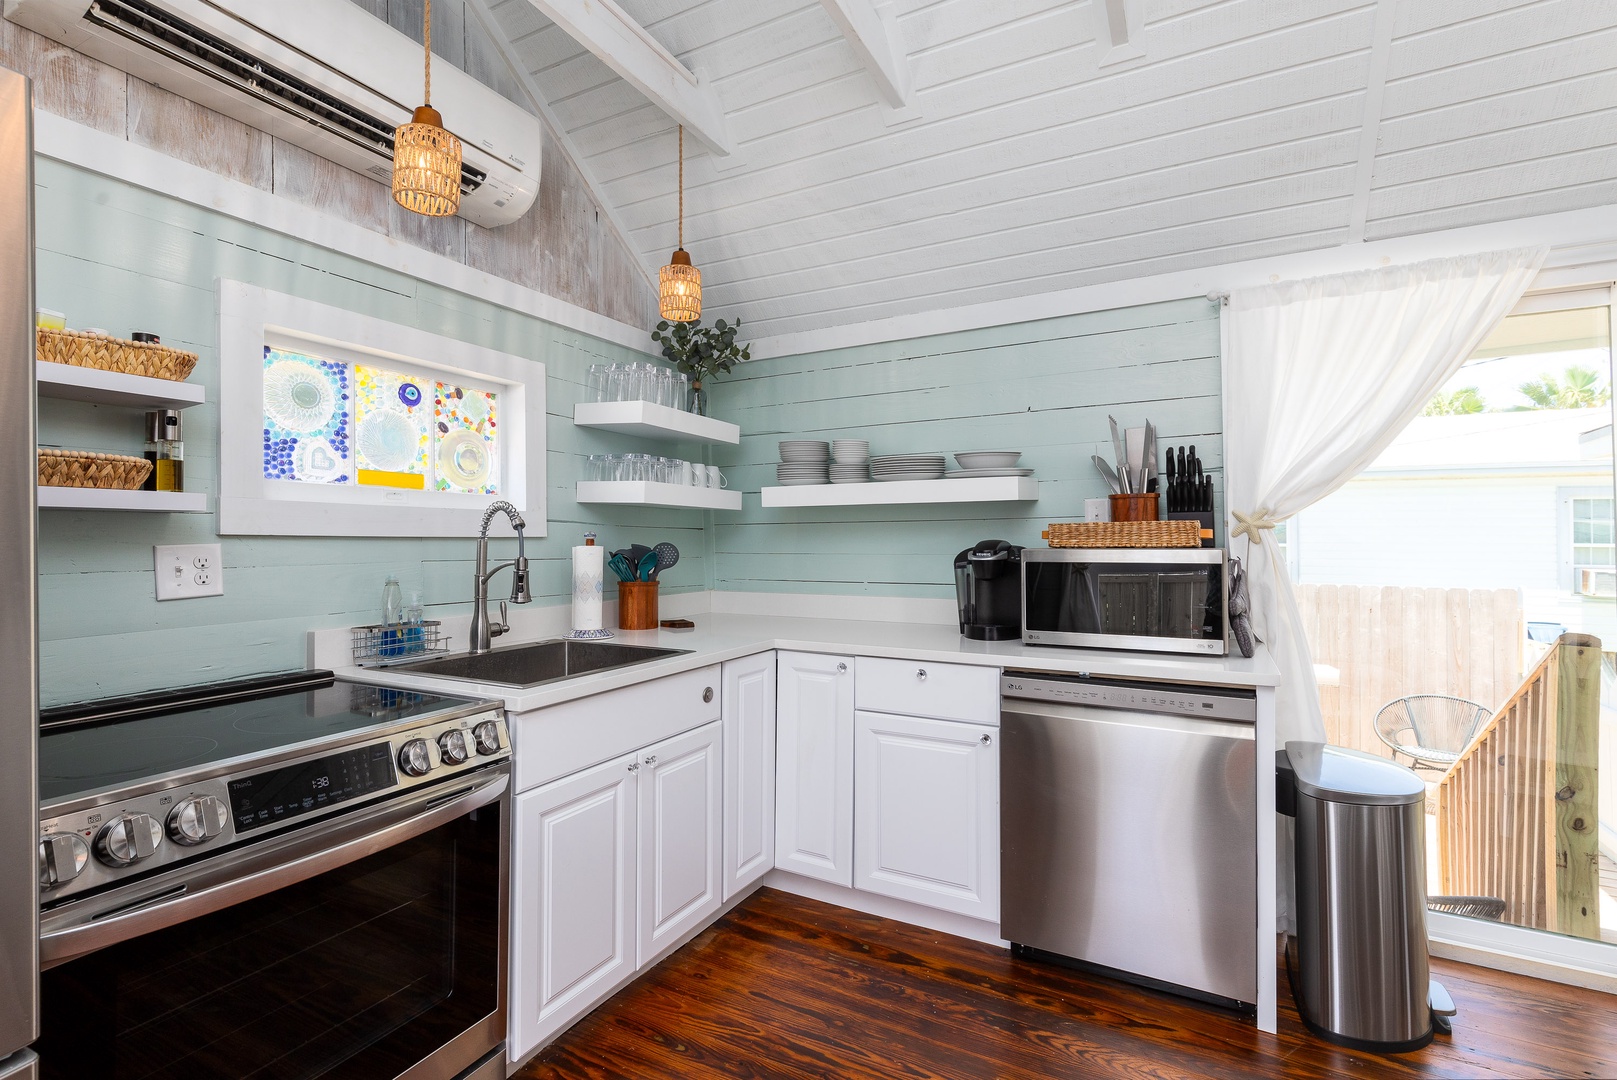 The delightful coastal kitchen is well-equipped for your visit to Port Aransas